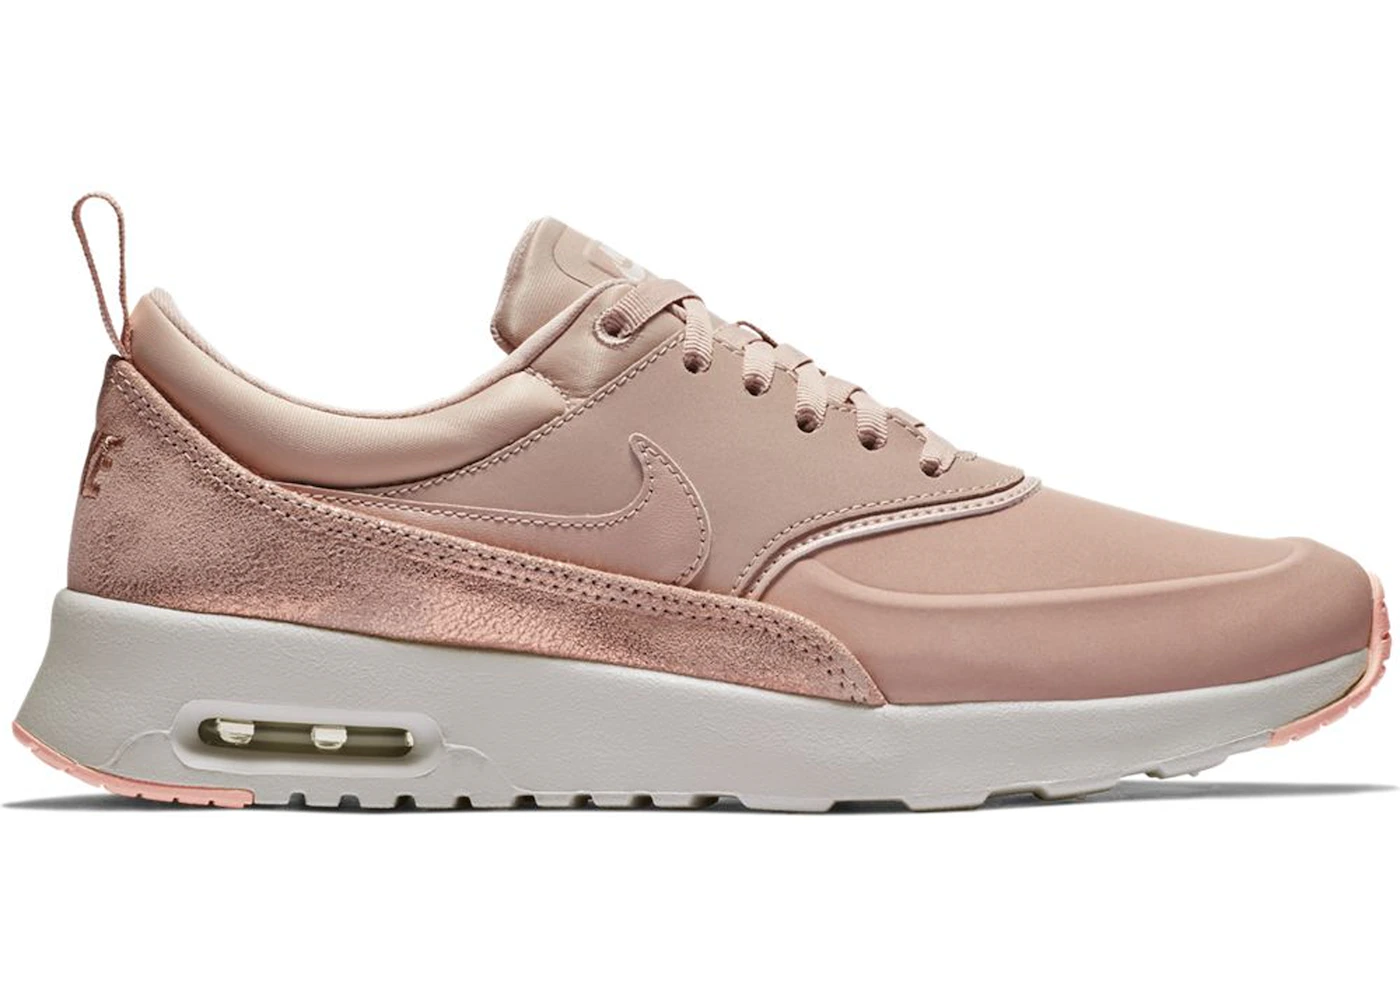 Nike Max Thea Particle Beige (Women's) - 616723-206 - US